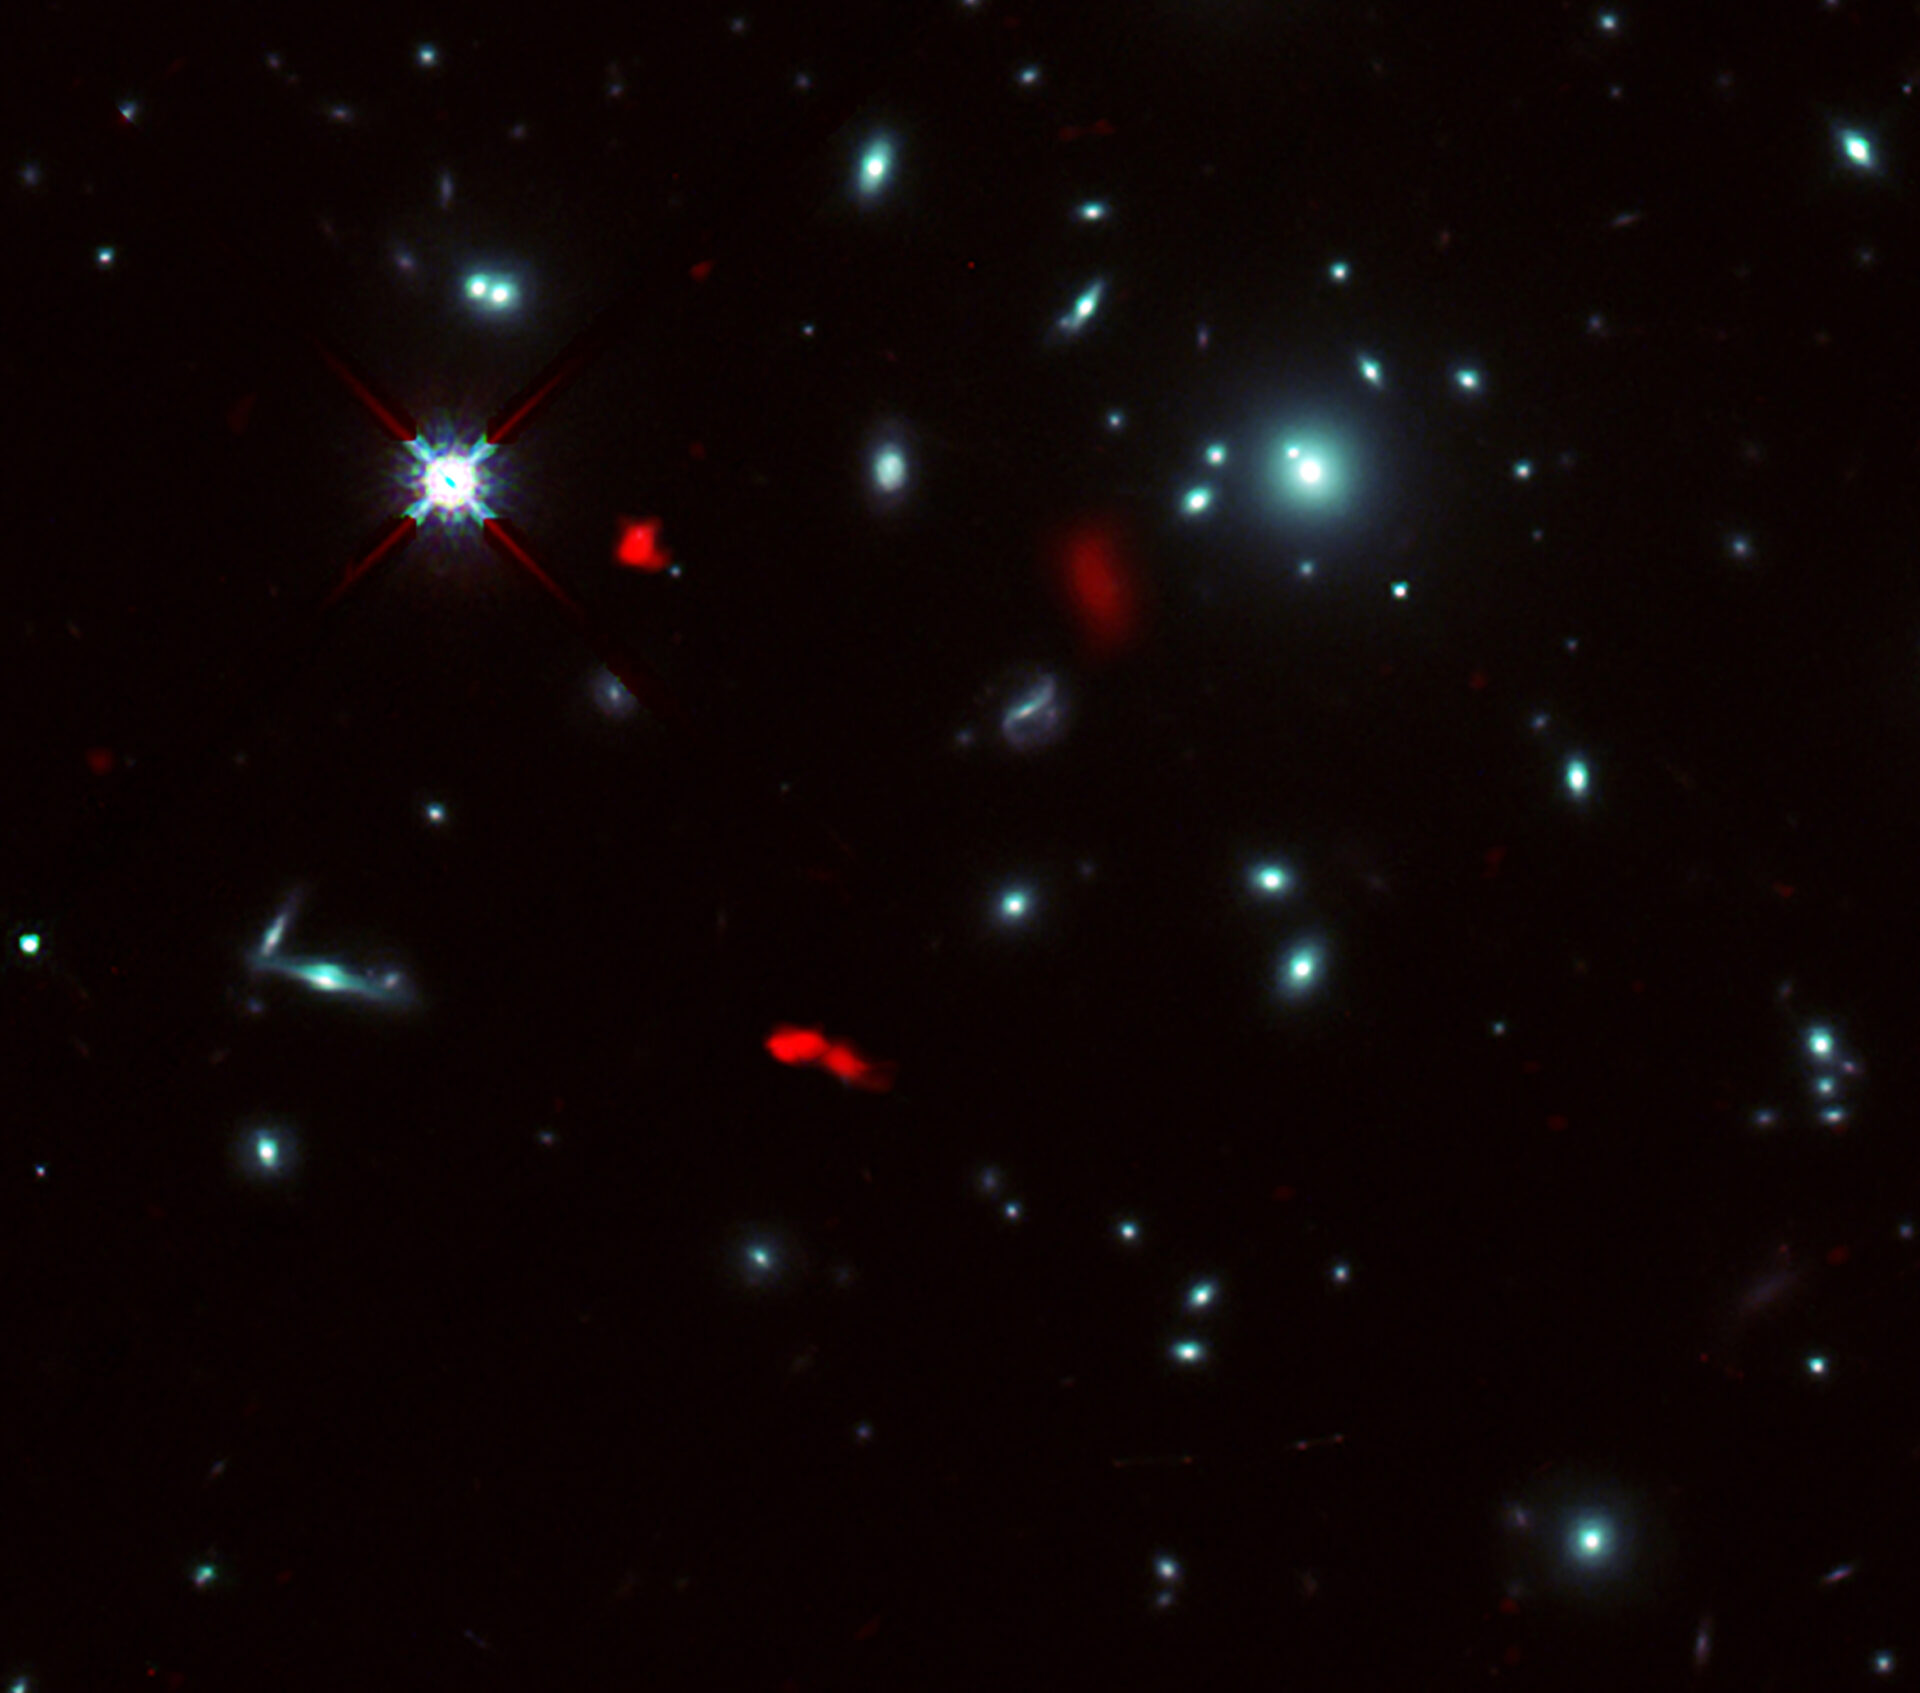 Image of the galaxy cluster RXCJ0600-2007 taken by the NASA/ESA Hubble Space Telescope, combined with gravitational lensing images of the distant galaxy RXCJ0600-z6, 12.4 billion light-years away, observed by ALMA (shown in red). Due to the gravitational lensing effect by the galaxy cluster, the image of RXCJ0600-z6 was intensified and magnified, and appeared to be divided into three or more parts. Credit: ALMA (ESO/NAOJ/NRAO), Fujimoto et al., NASA/ESA Hubble Space Telescope